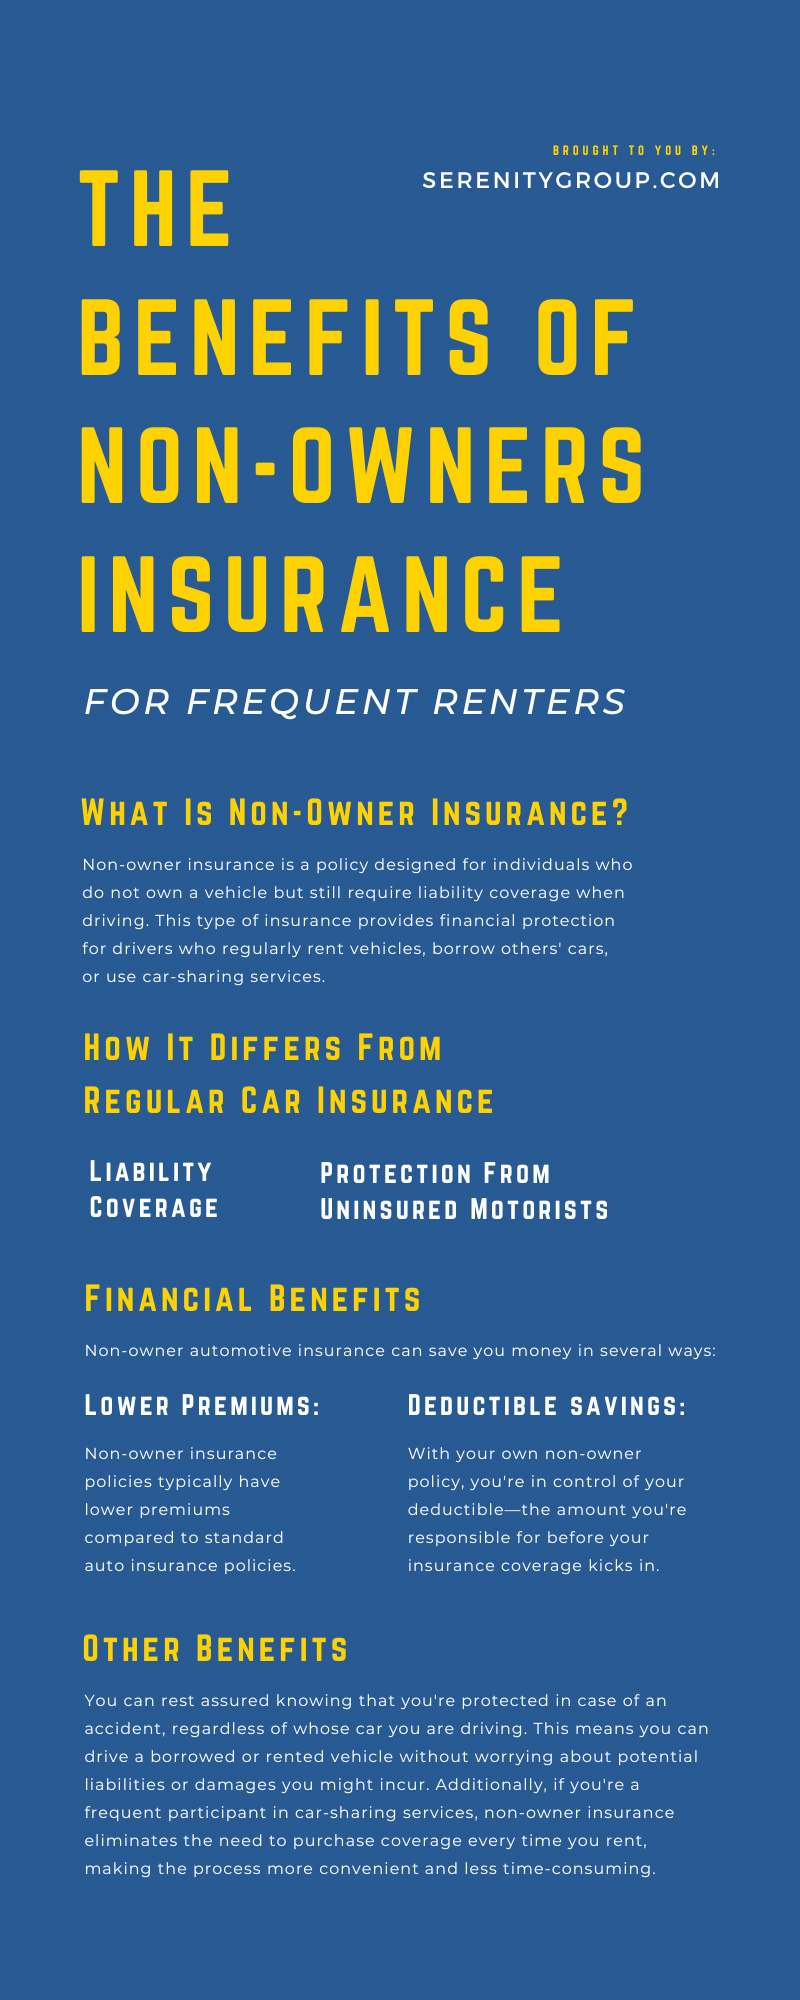 The Benefits of Non-Owners Insurance for Frequent Renters